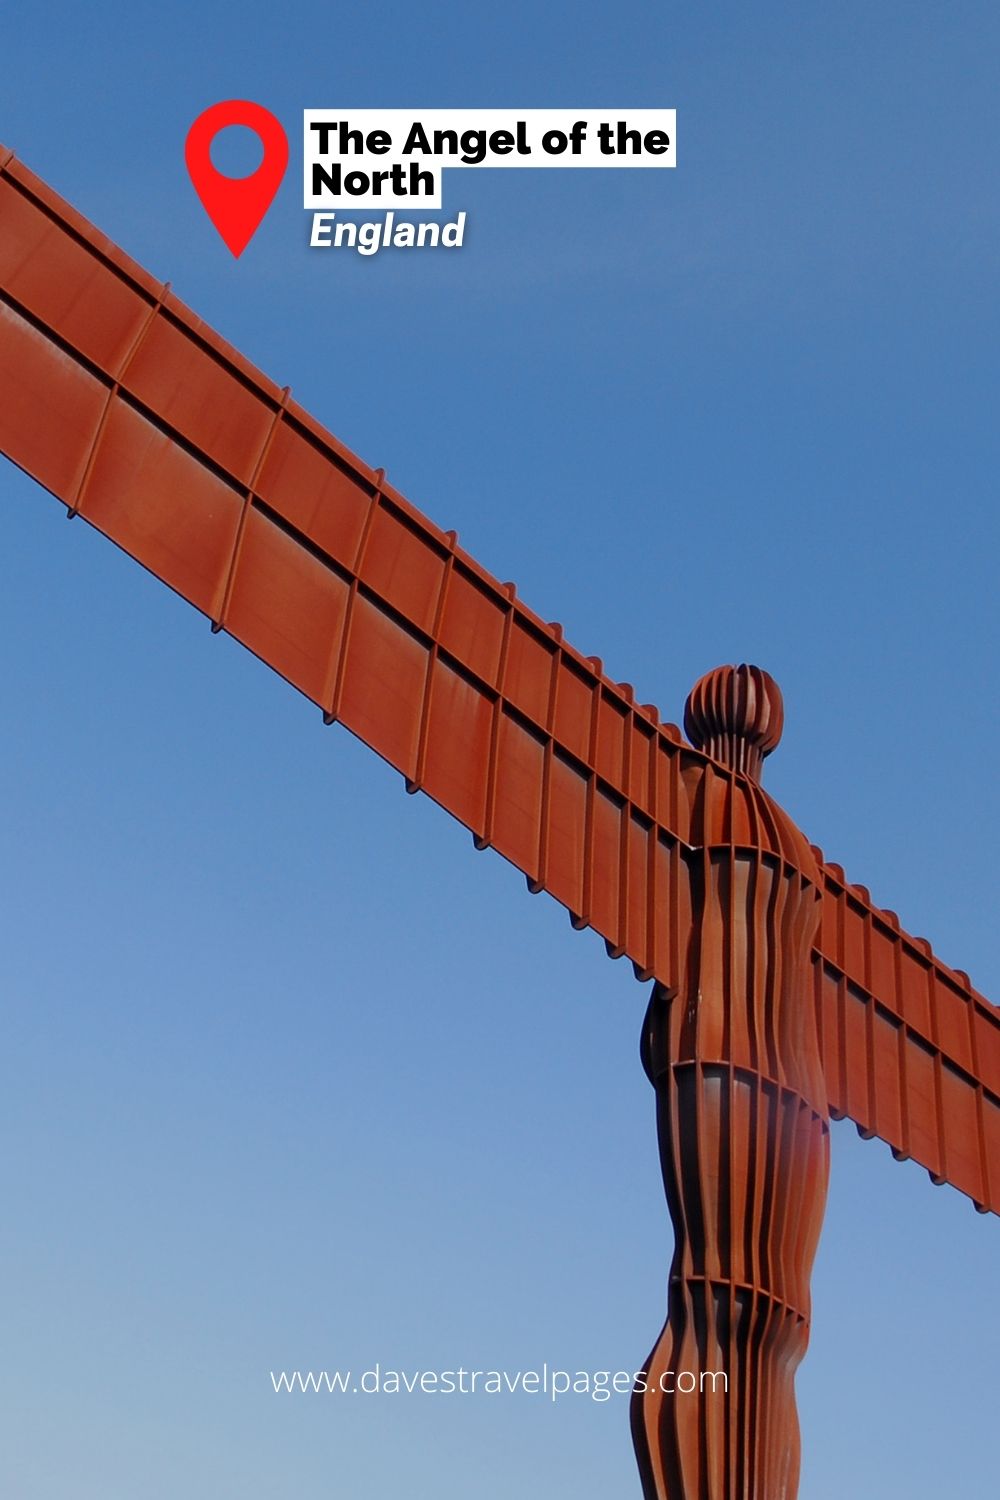 The Angel of the North - England